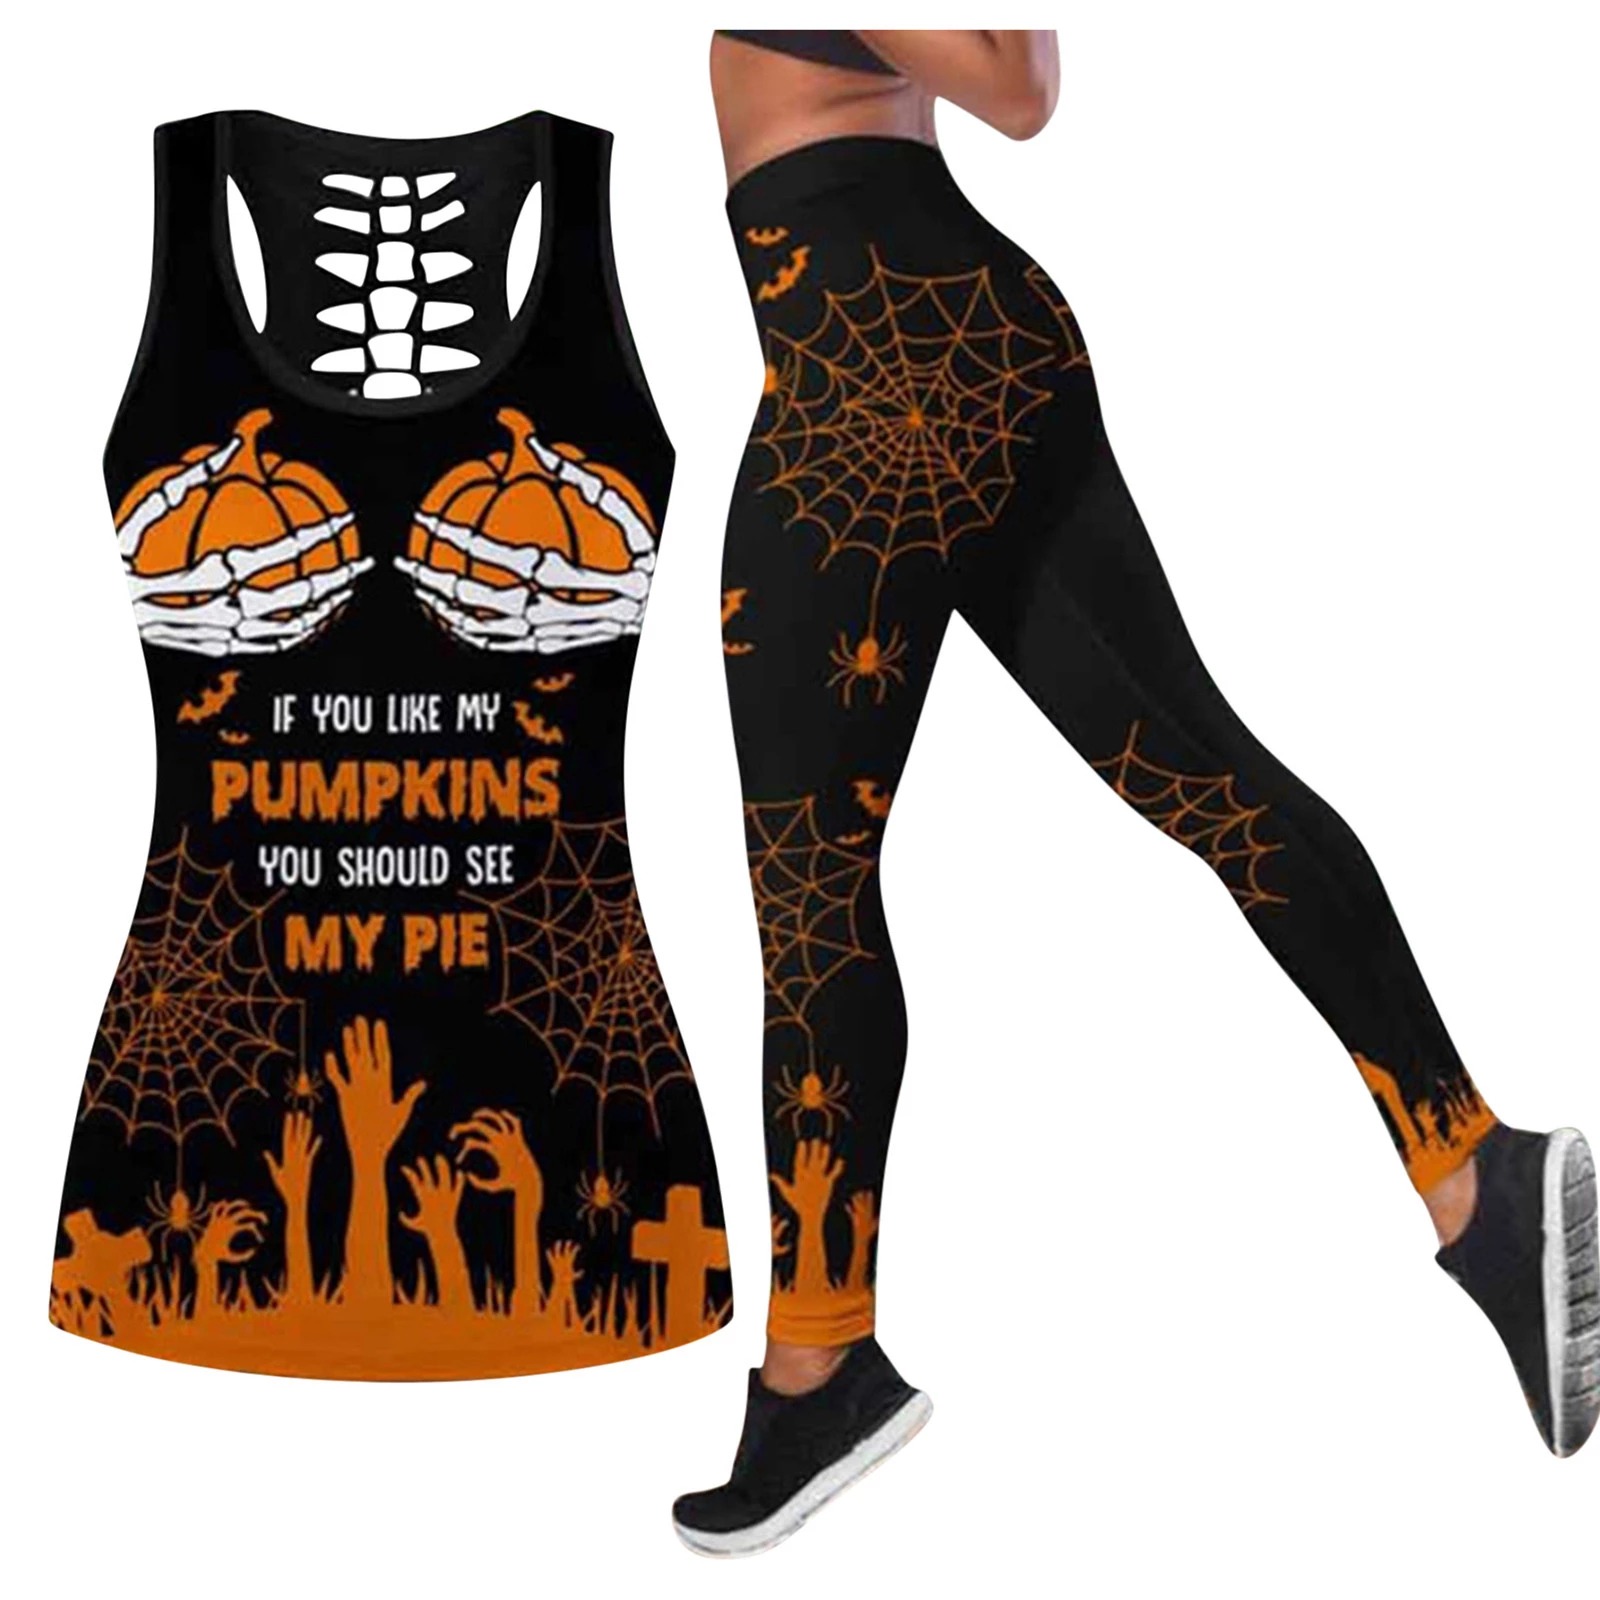 If you like my pumpkin you should see my pie legging and tank top 2